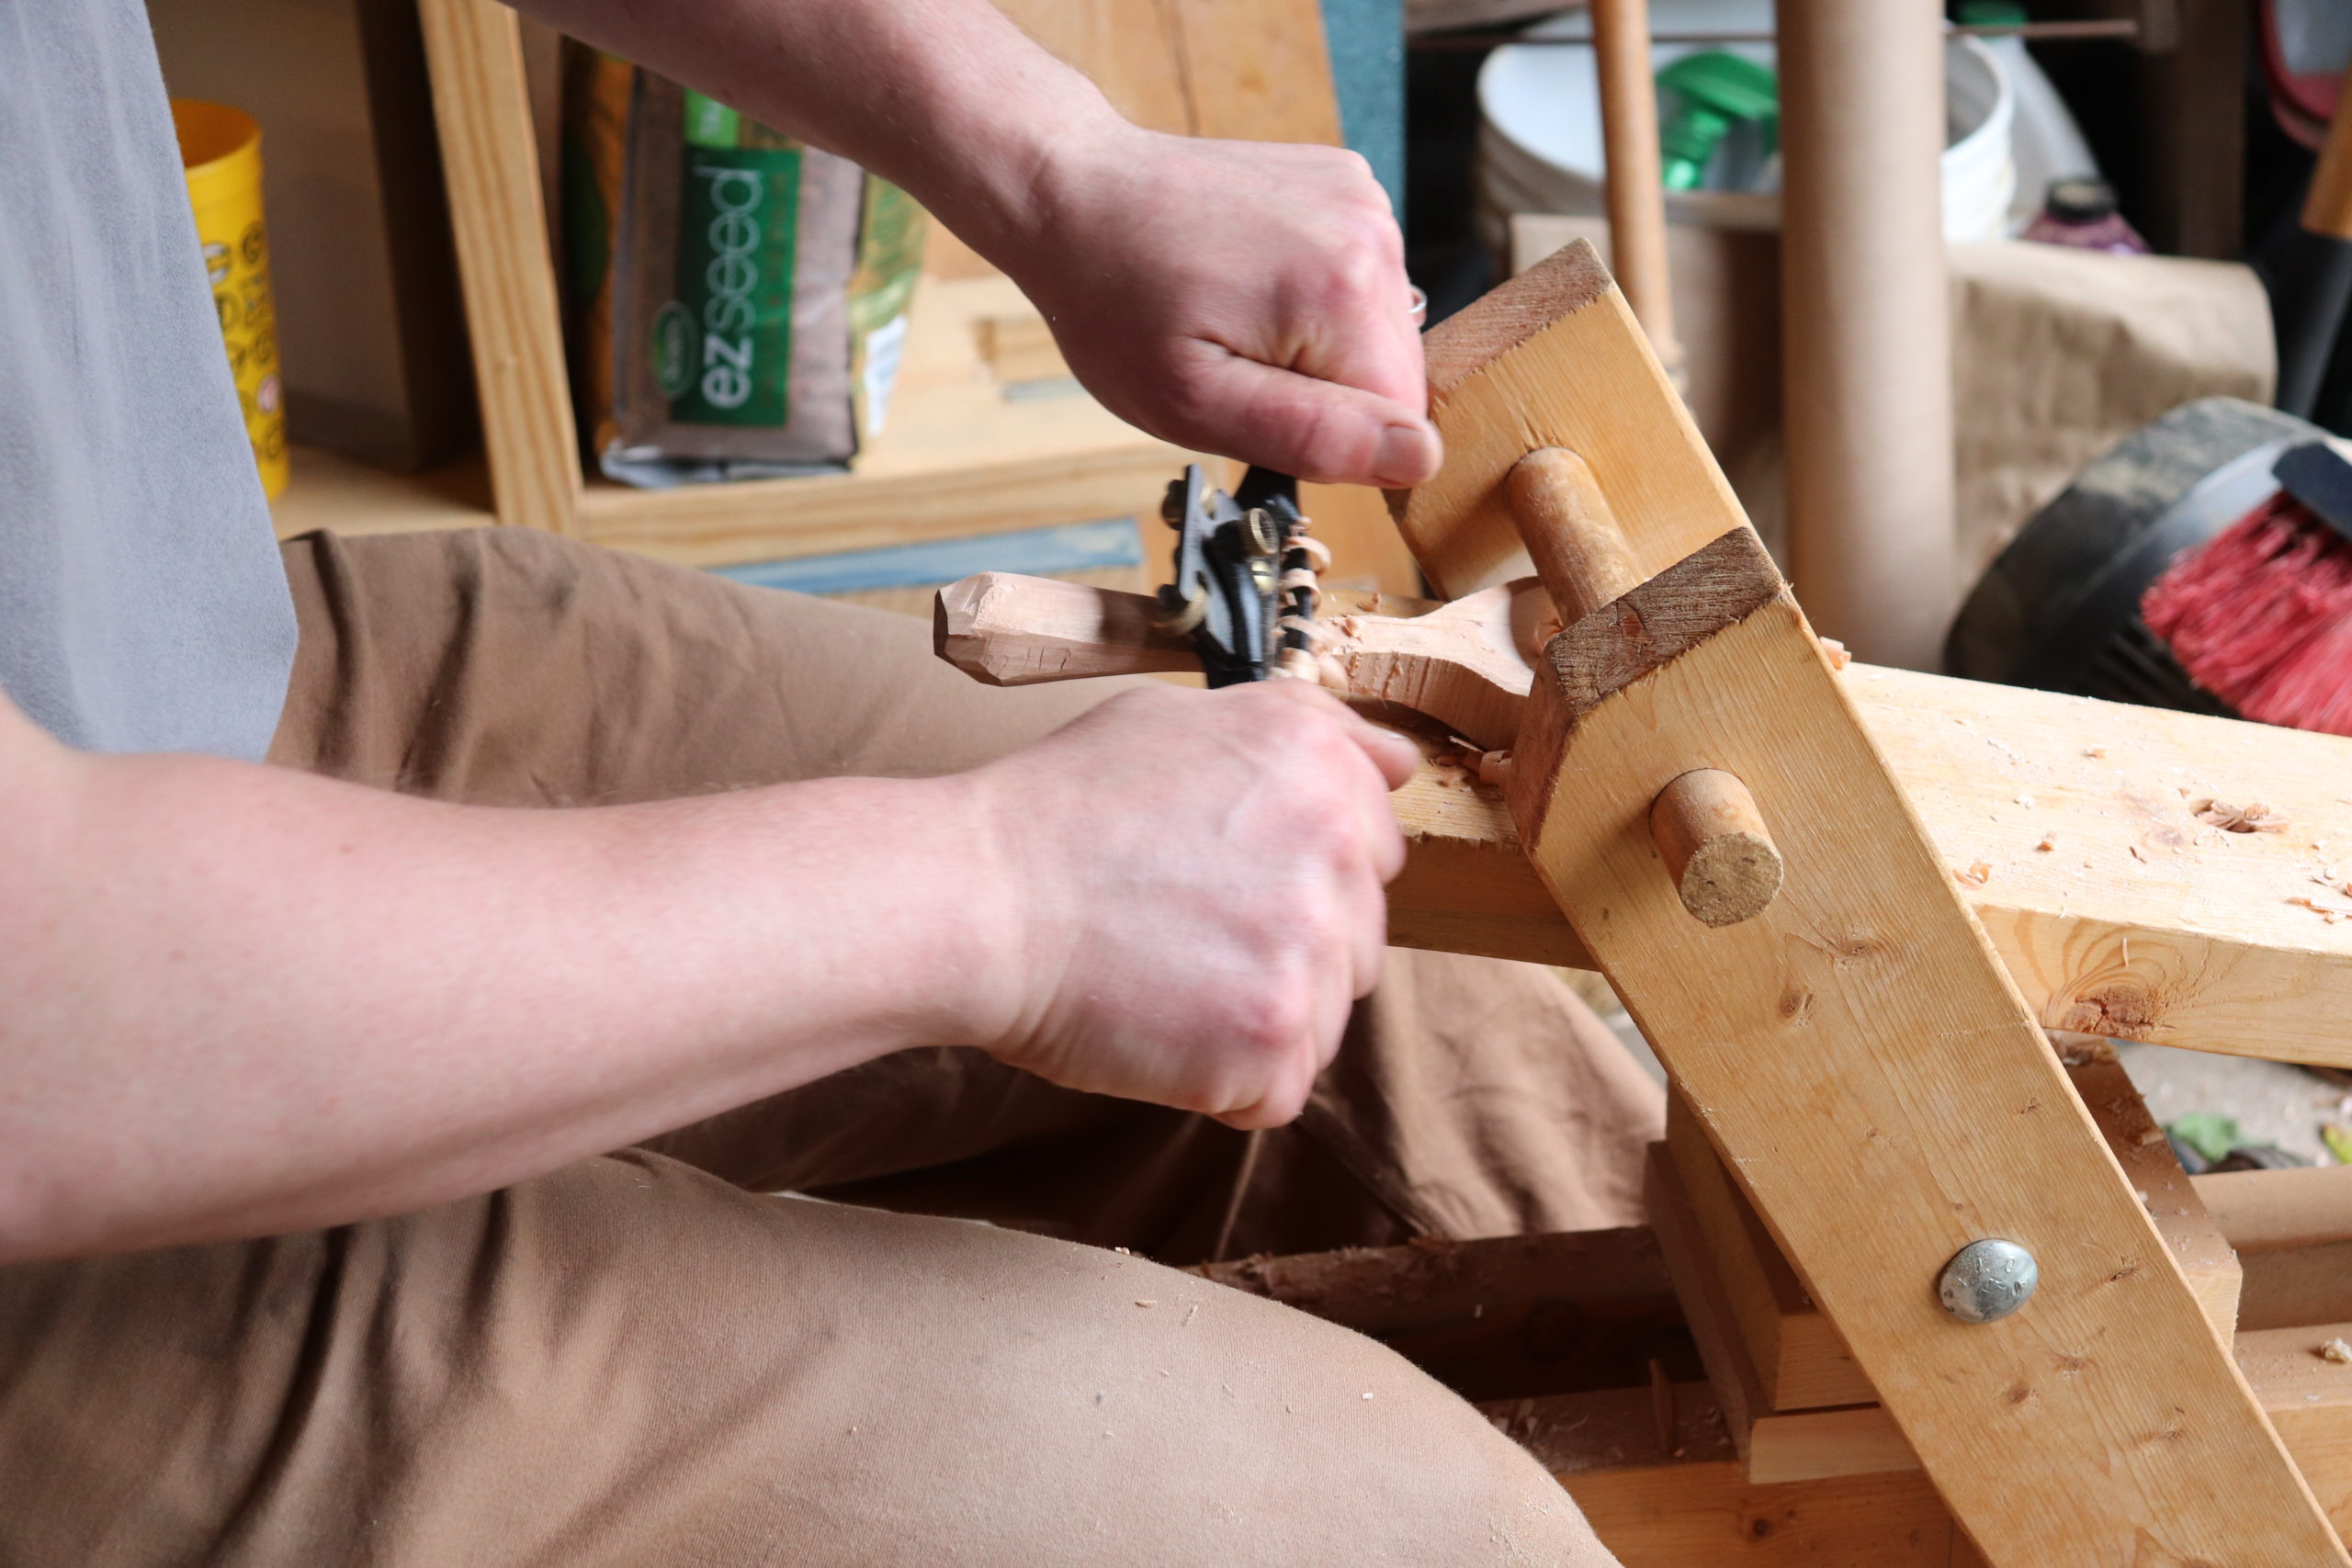 using a spokeshave at the shaving horse